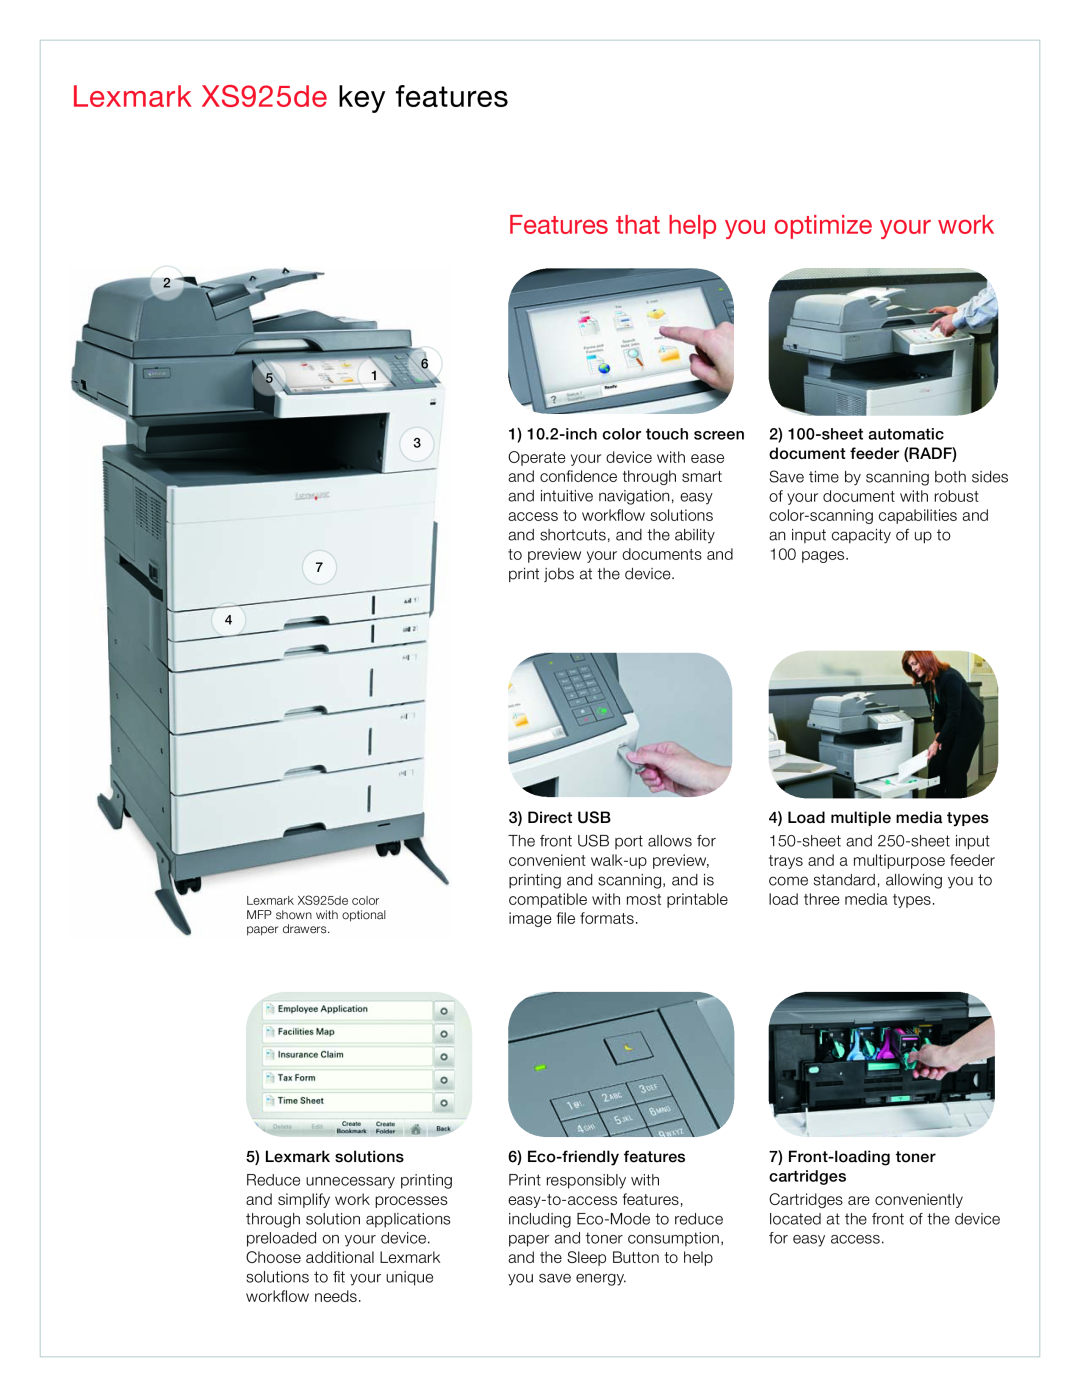 Lexmark Color MFP manual Lexmark XS925de key features, Features that help you optimize your work 